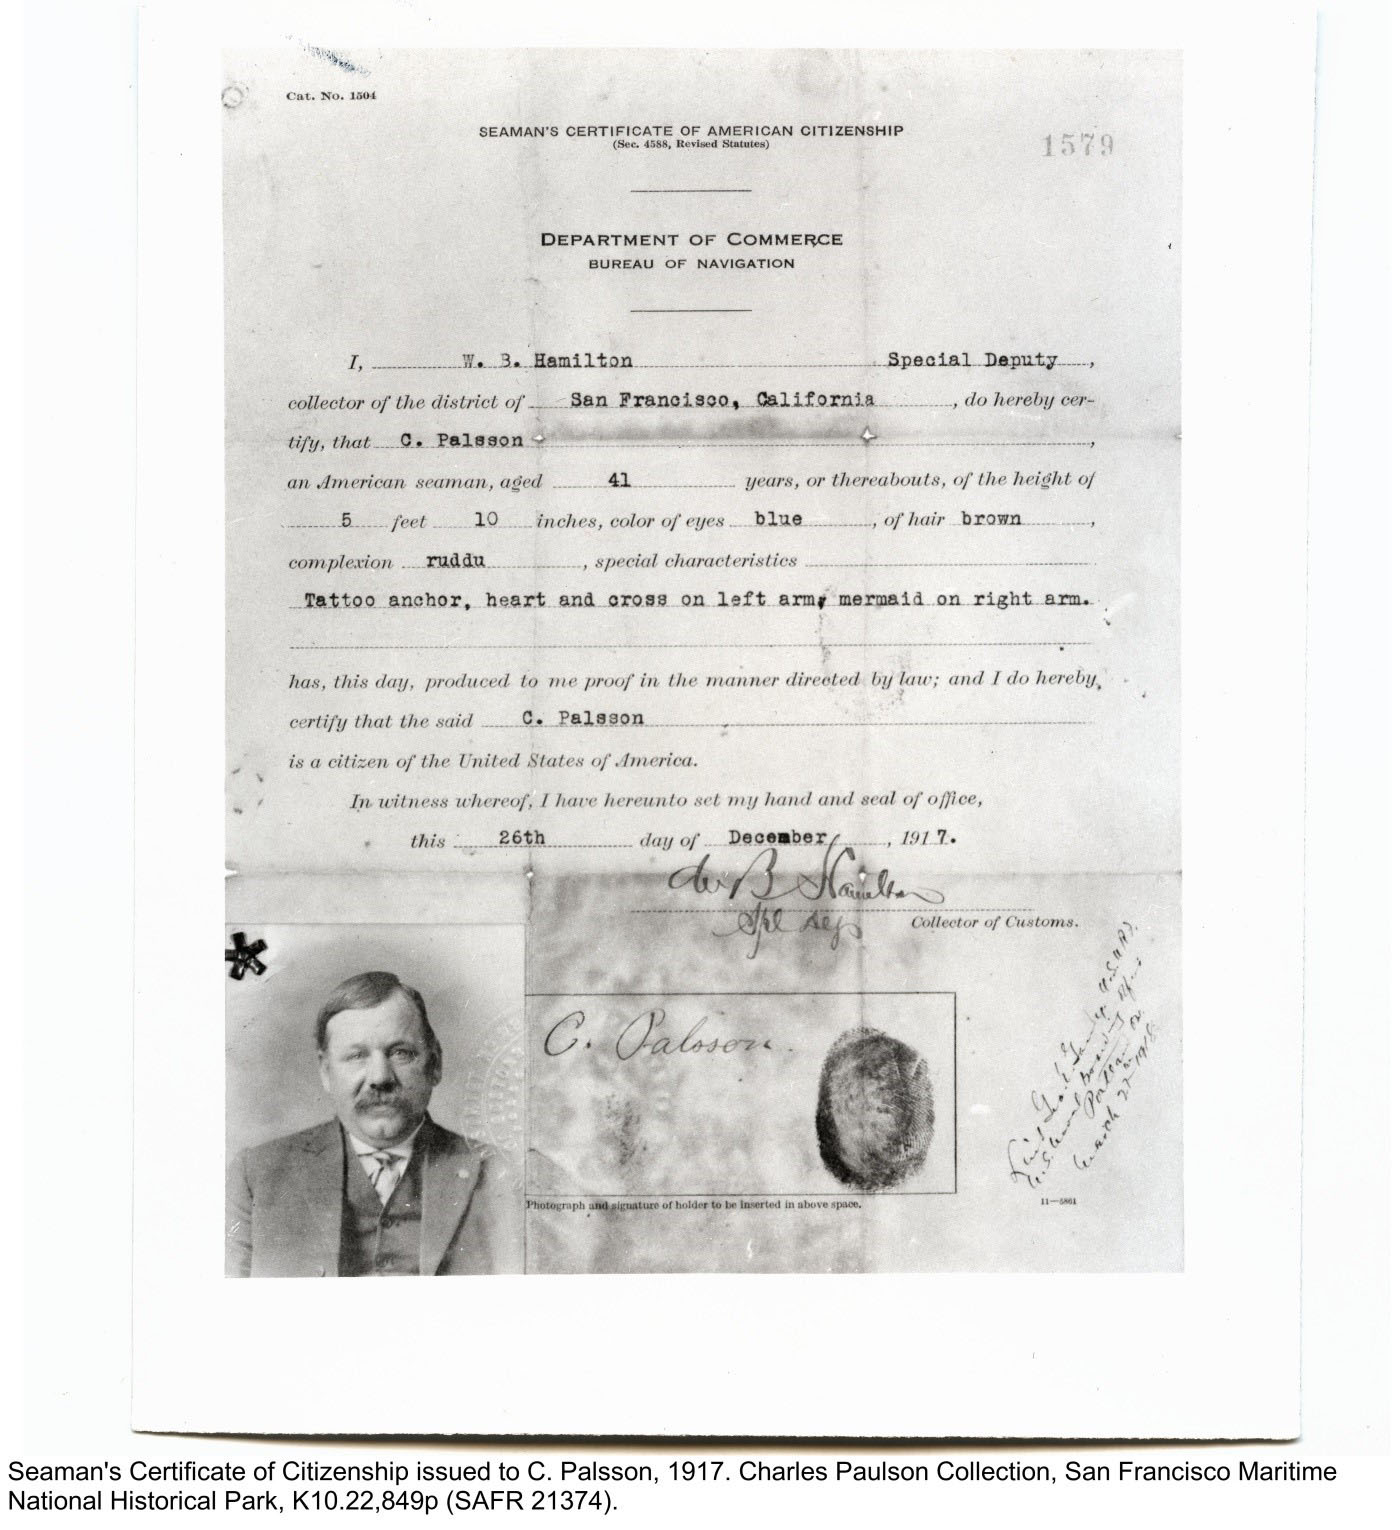 Seaman's Certificate of Citizenship issued to C. Palsson, 1917